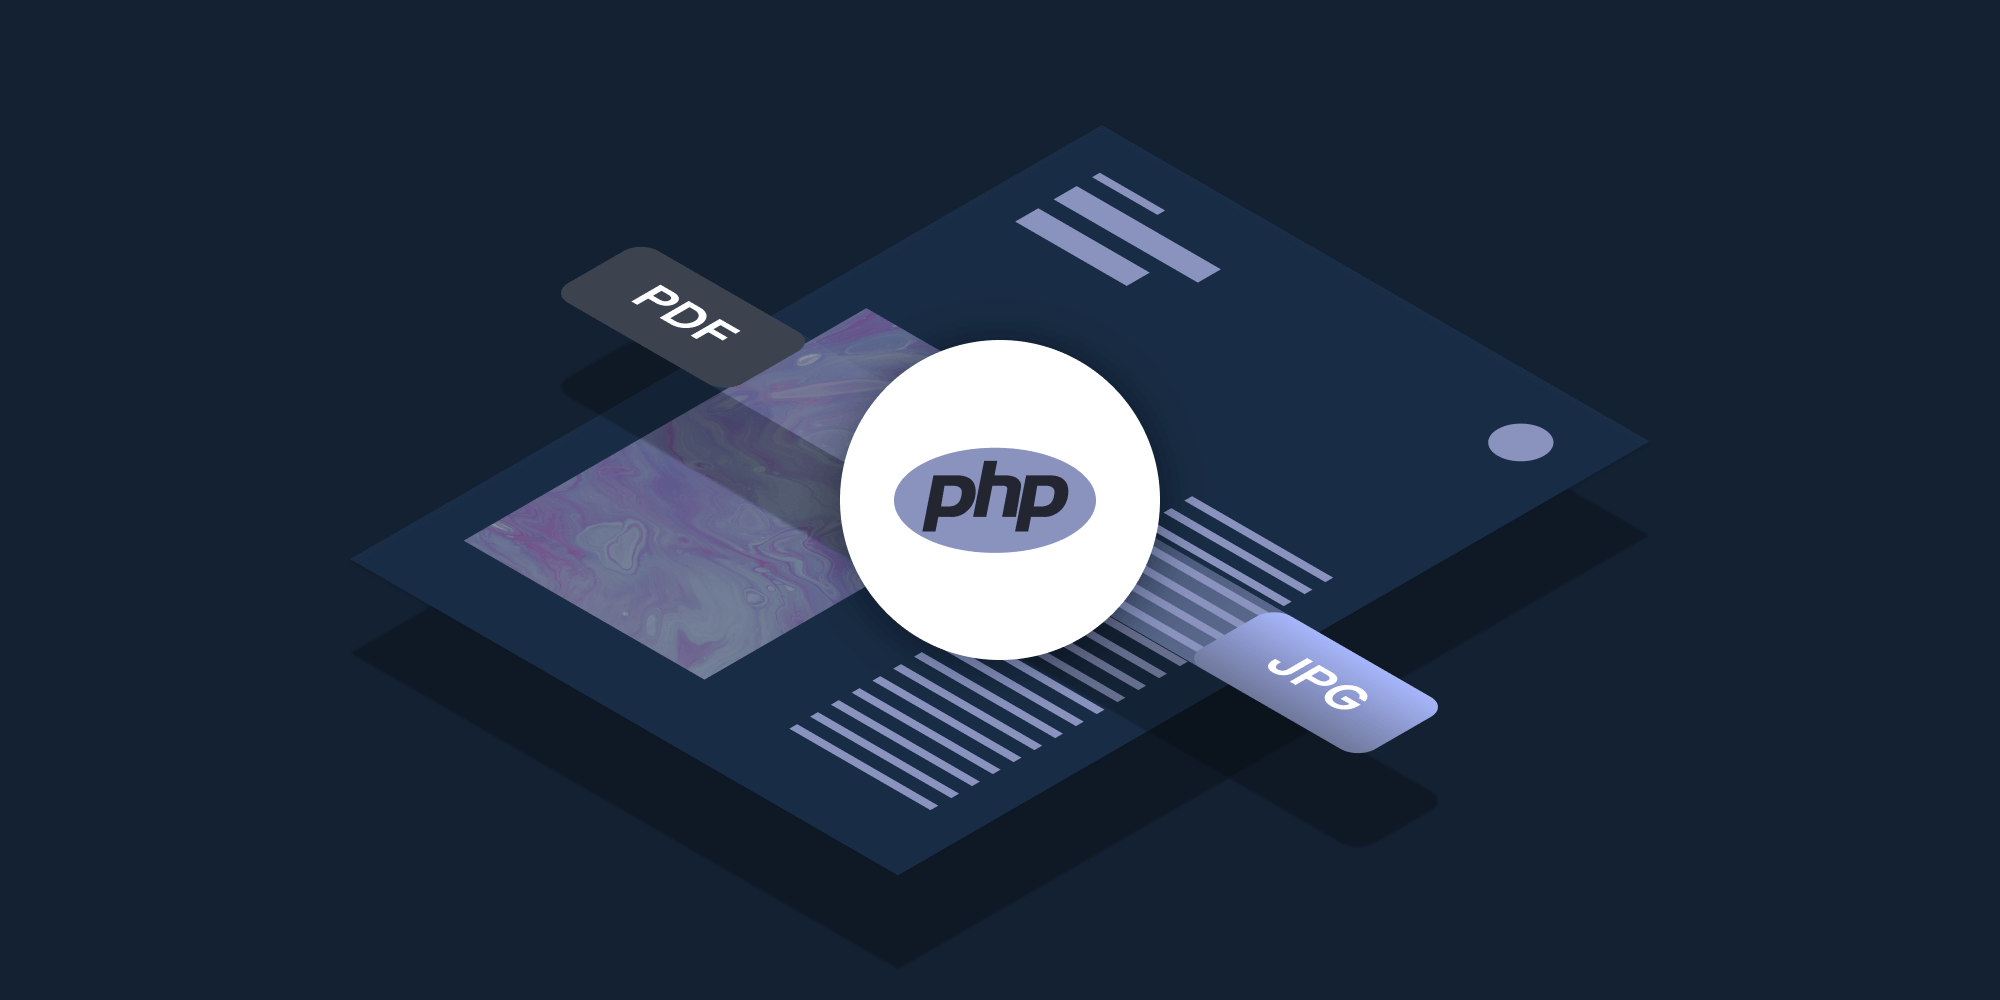 Illustration: How to Convert PDF to JPG Using PHP